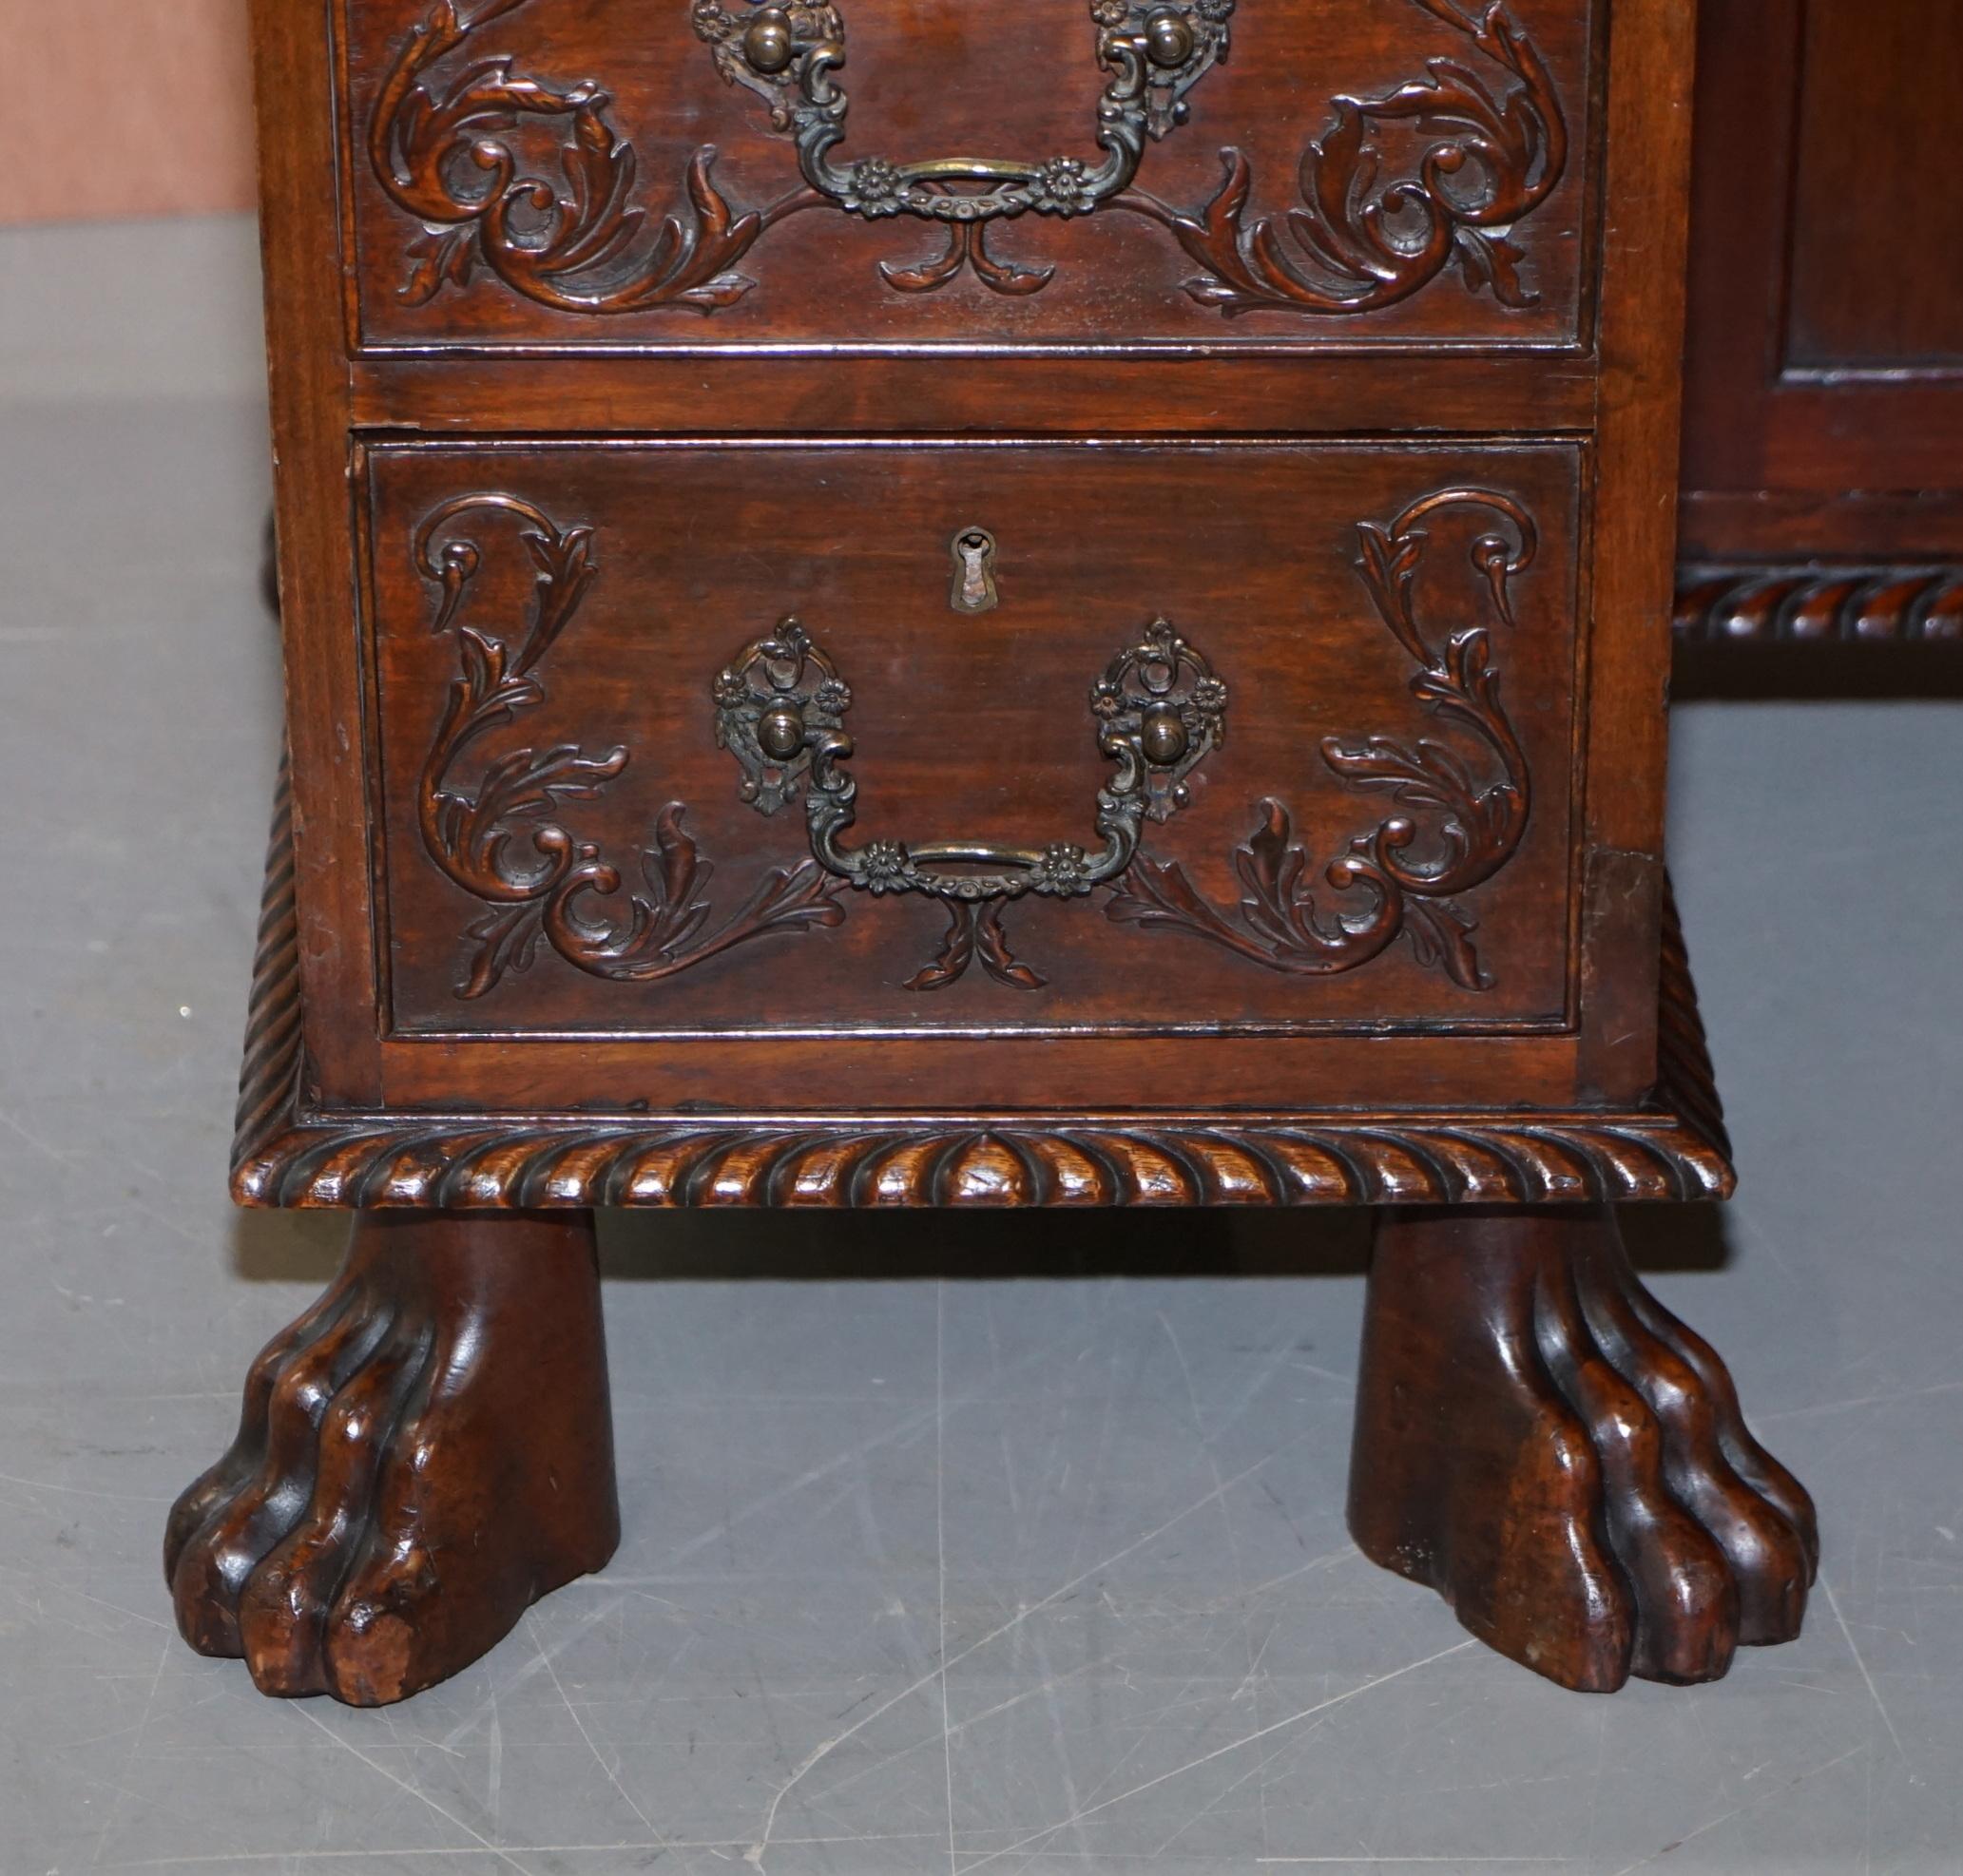 Sublime Hand Carved from Top to Bottom Antique Victorian 1850 Knee Hole Desk For Sale 4